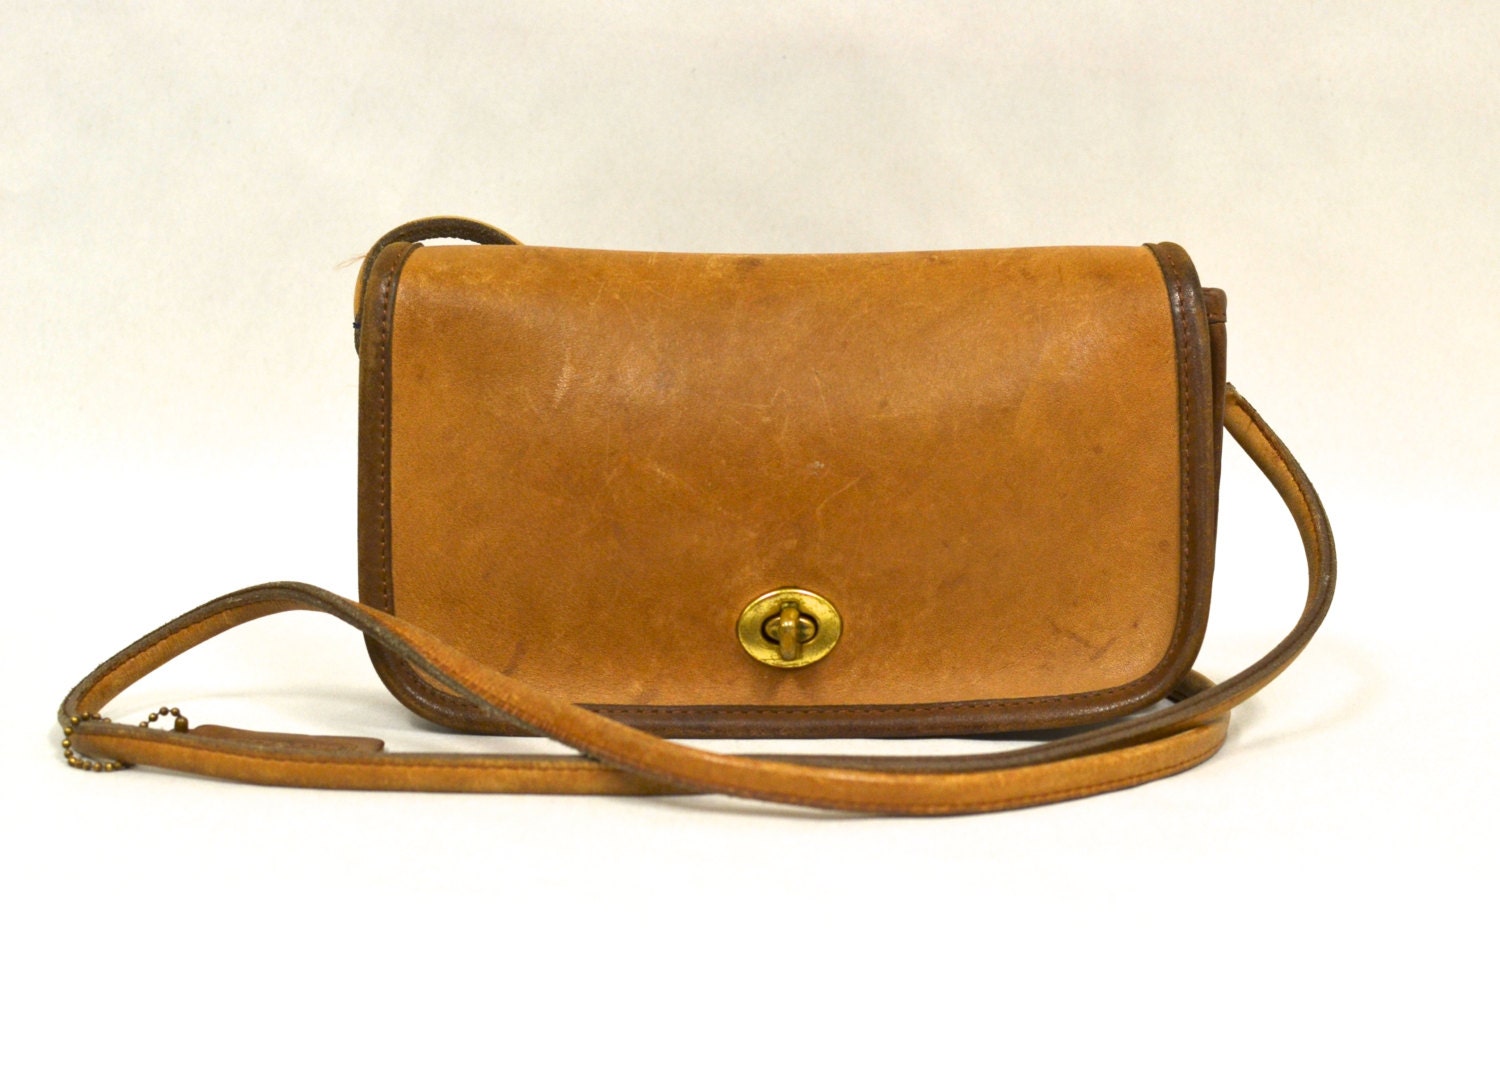 Vintage COACH Small Tan Leather Turnlock Crossbody Bag